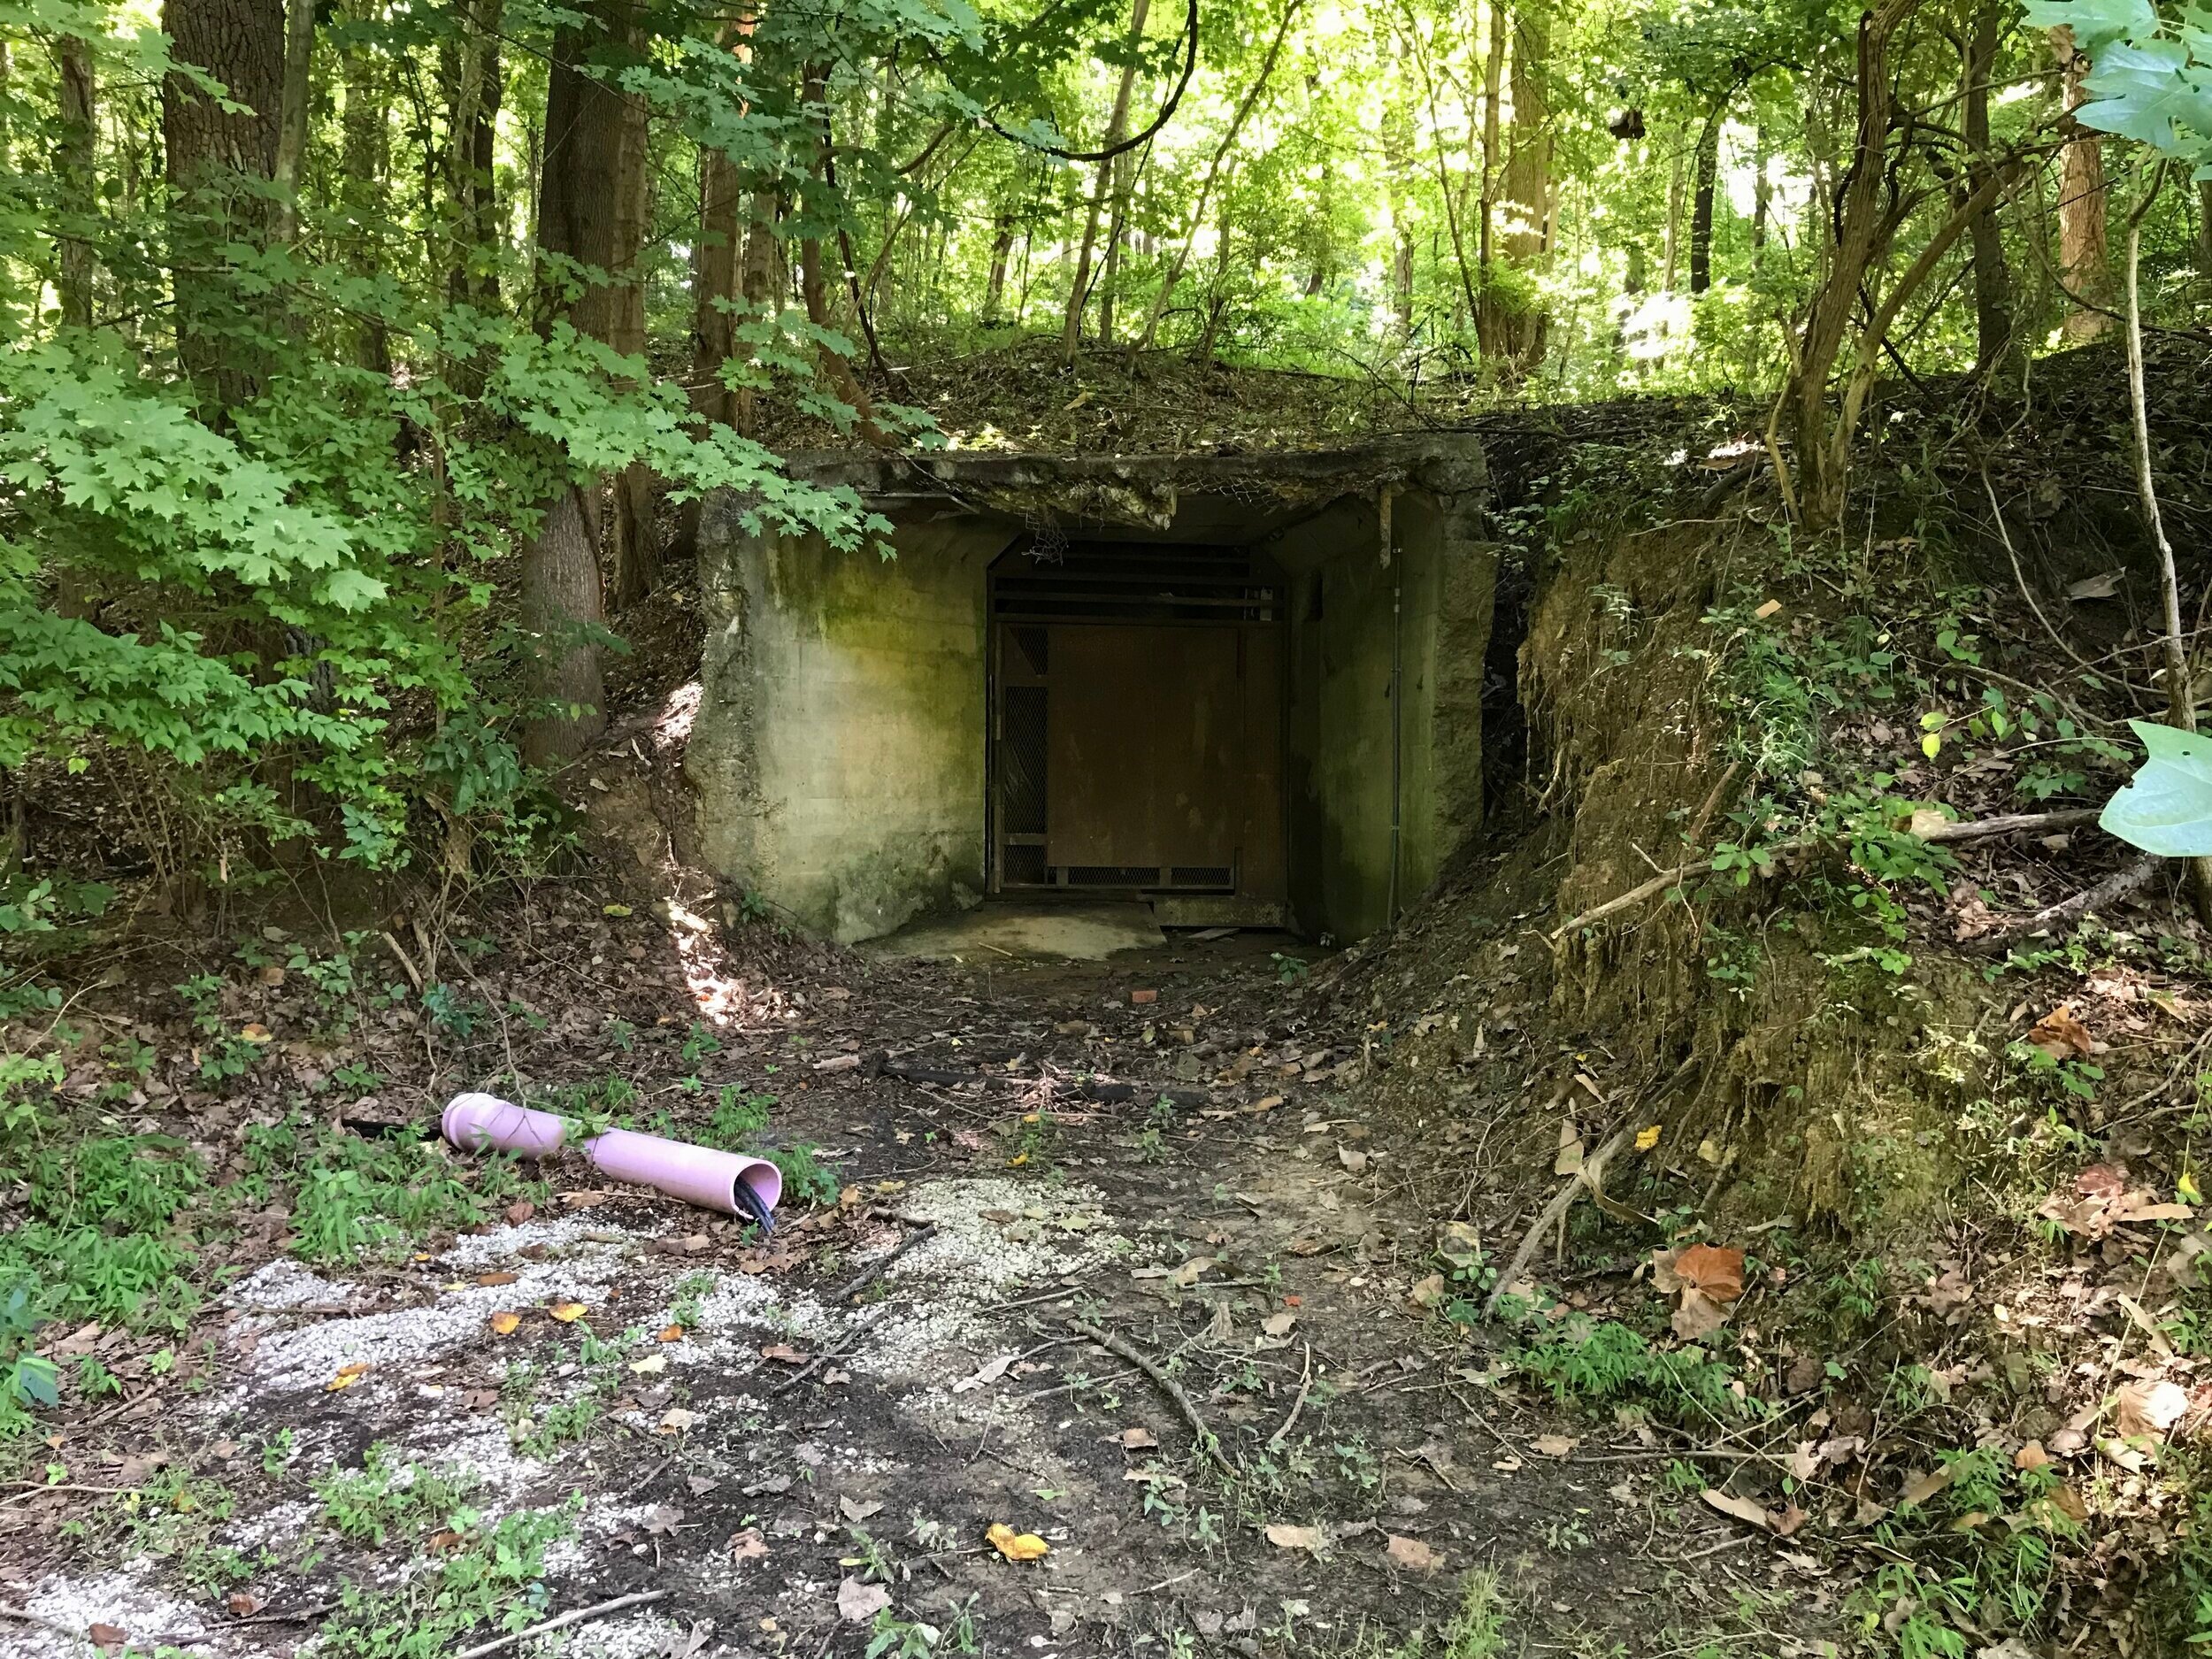  The ruins of the outside end of the “Death Tunnel” at the bottom of the hill, where supplies went up and deceased patients reportedly came down. 